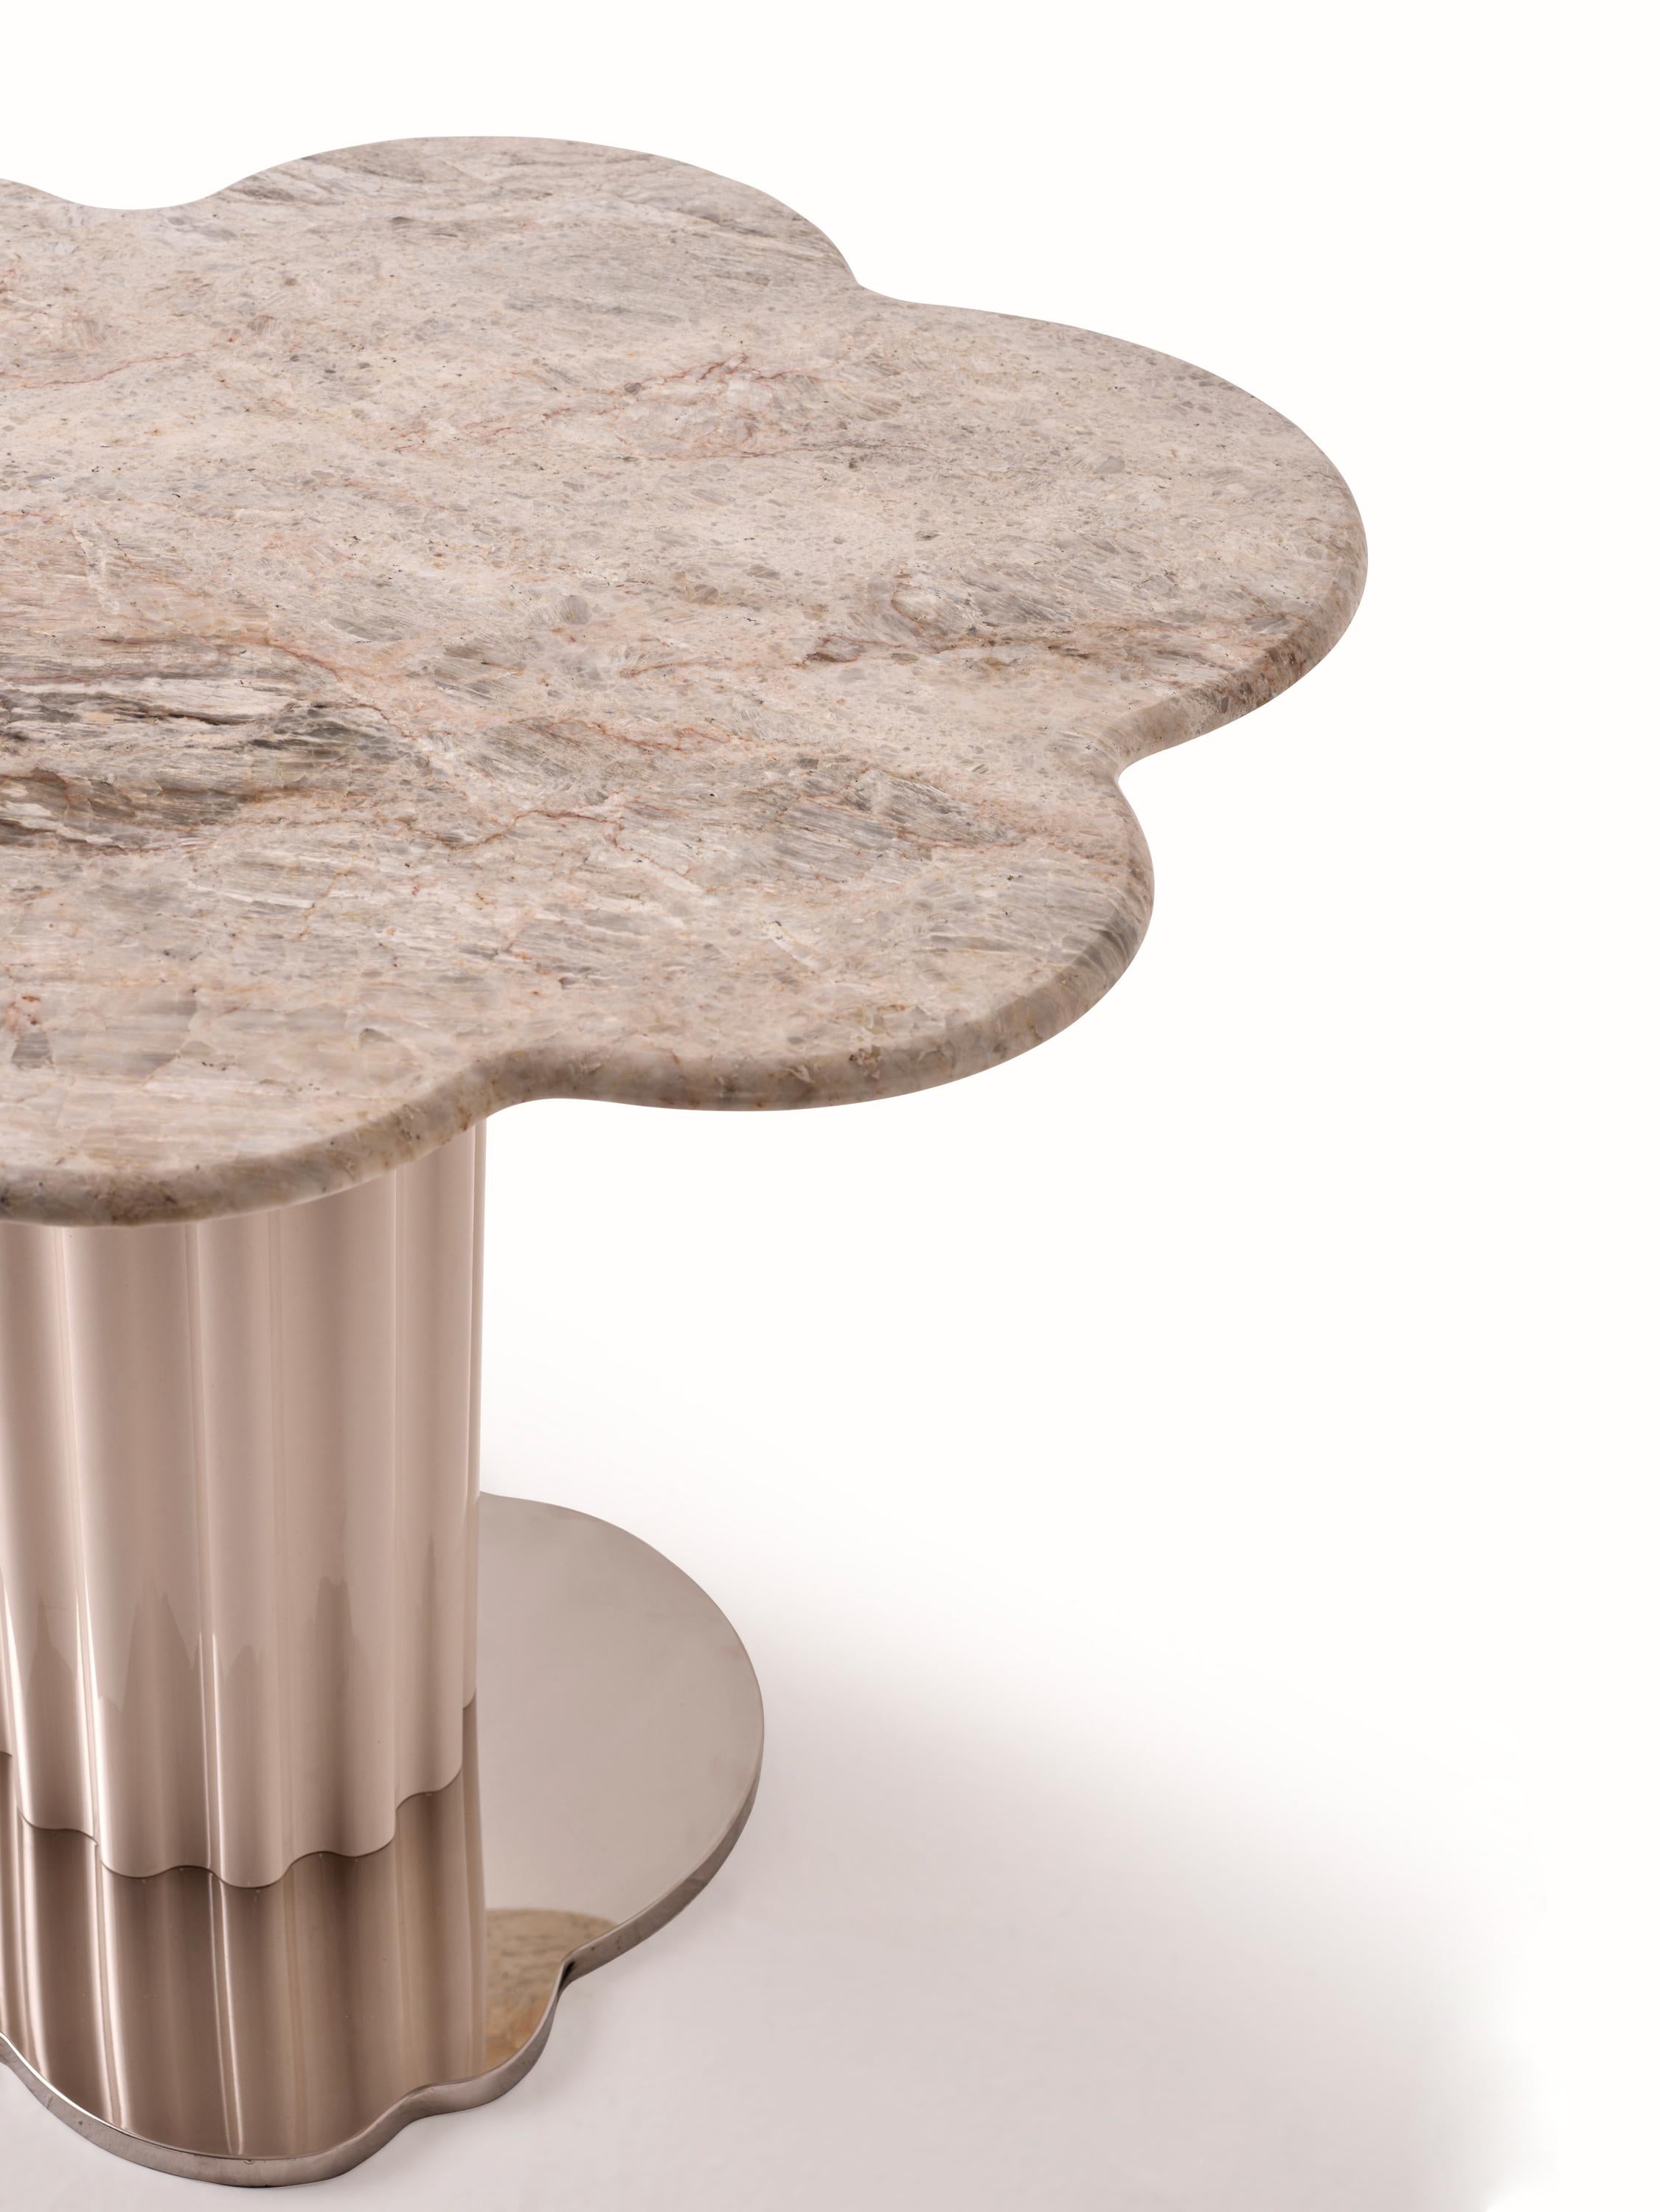 Sulpap Cream Colored Marble Dining Table with Polished Chrome Base In New Condition For Sale In New York, NY